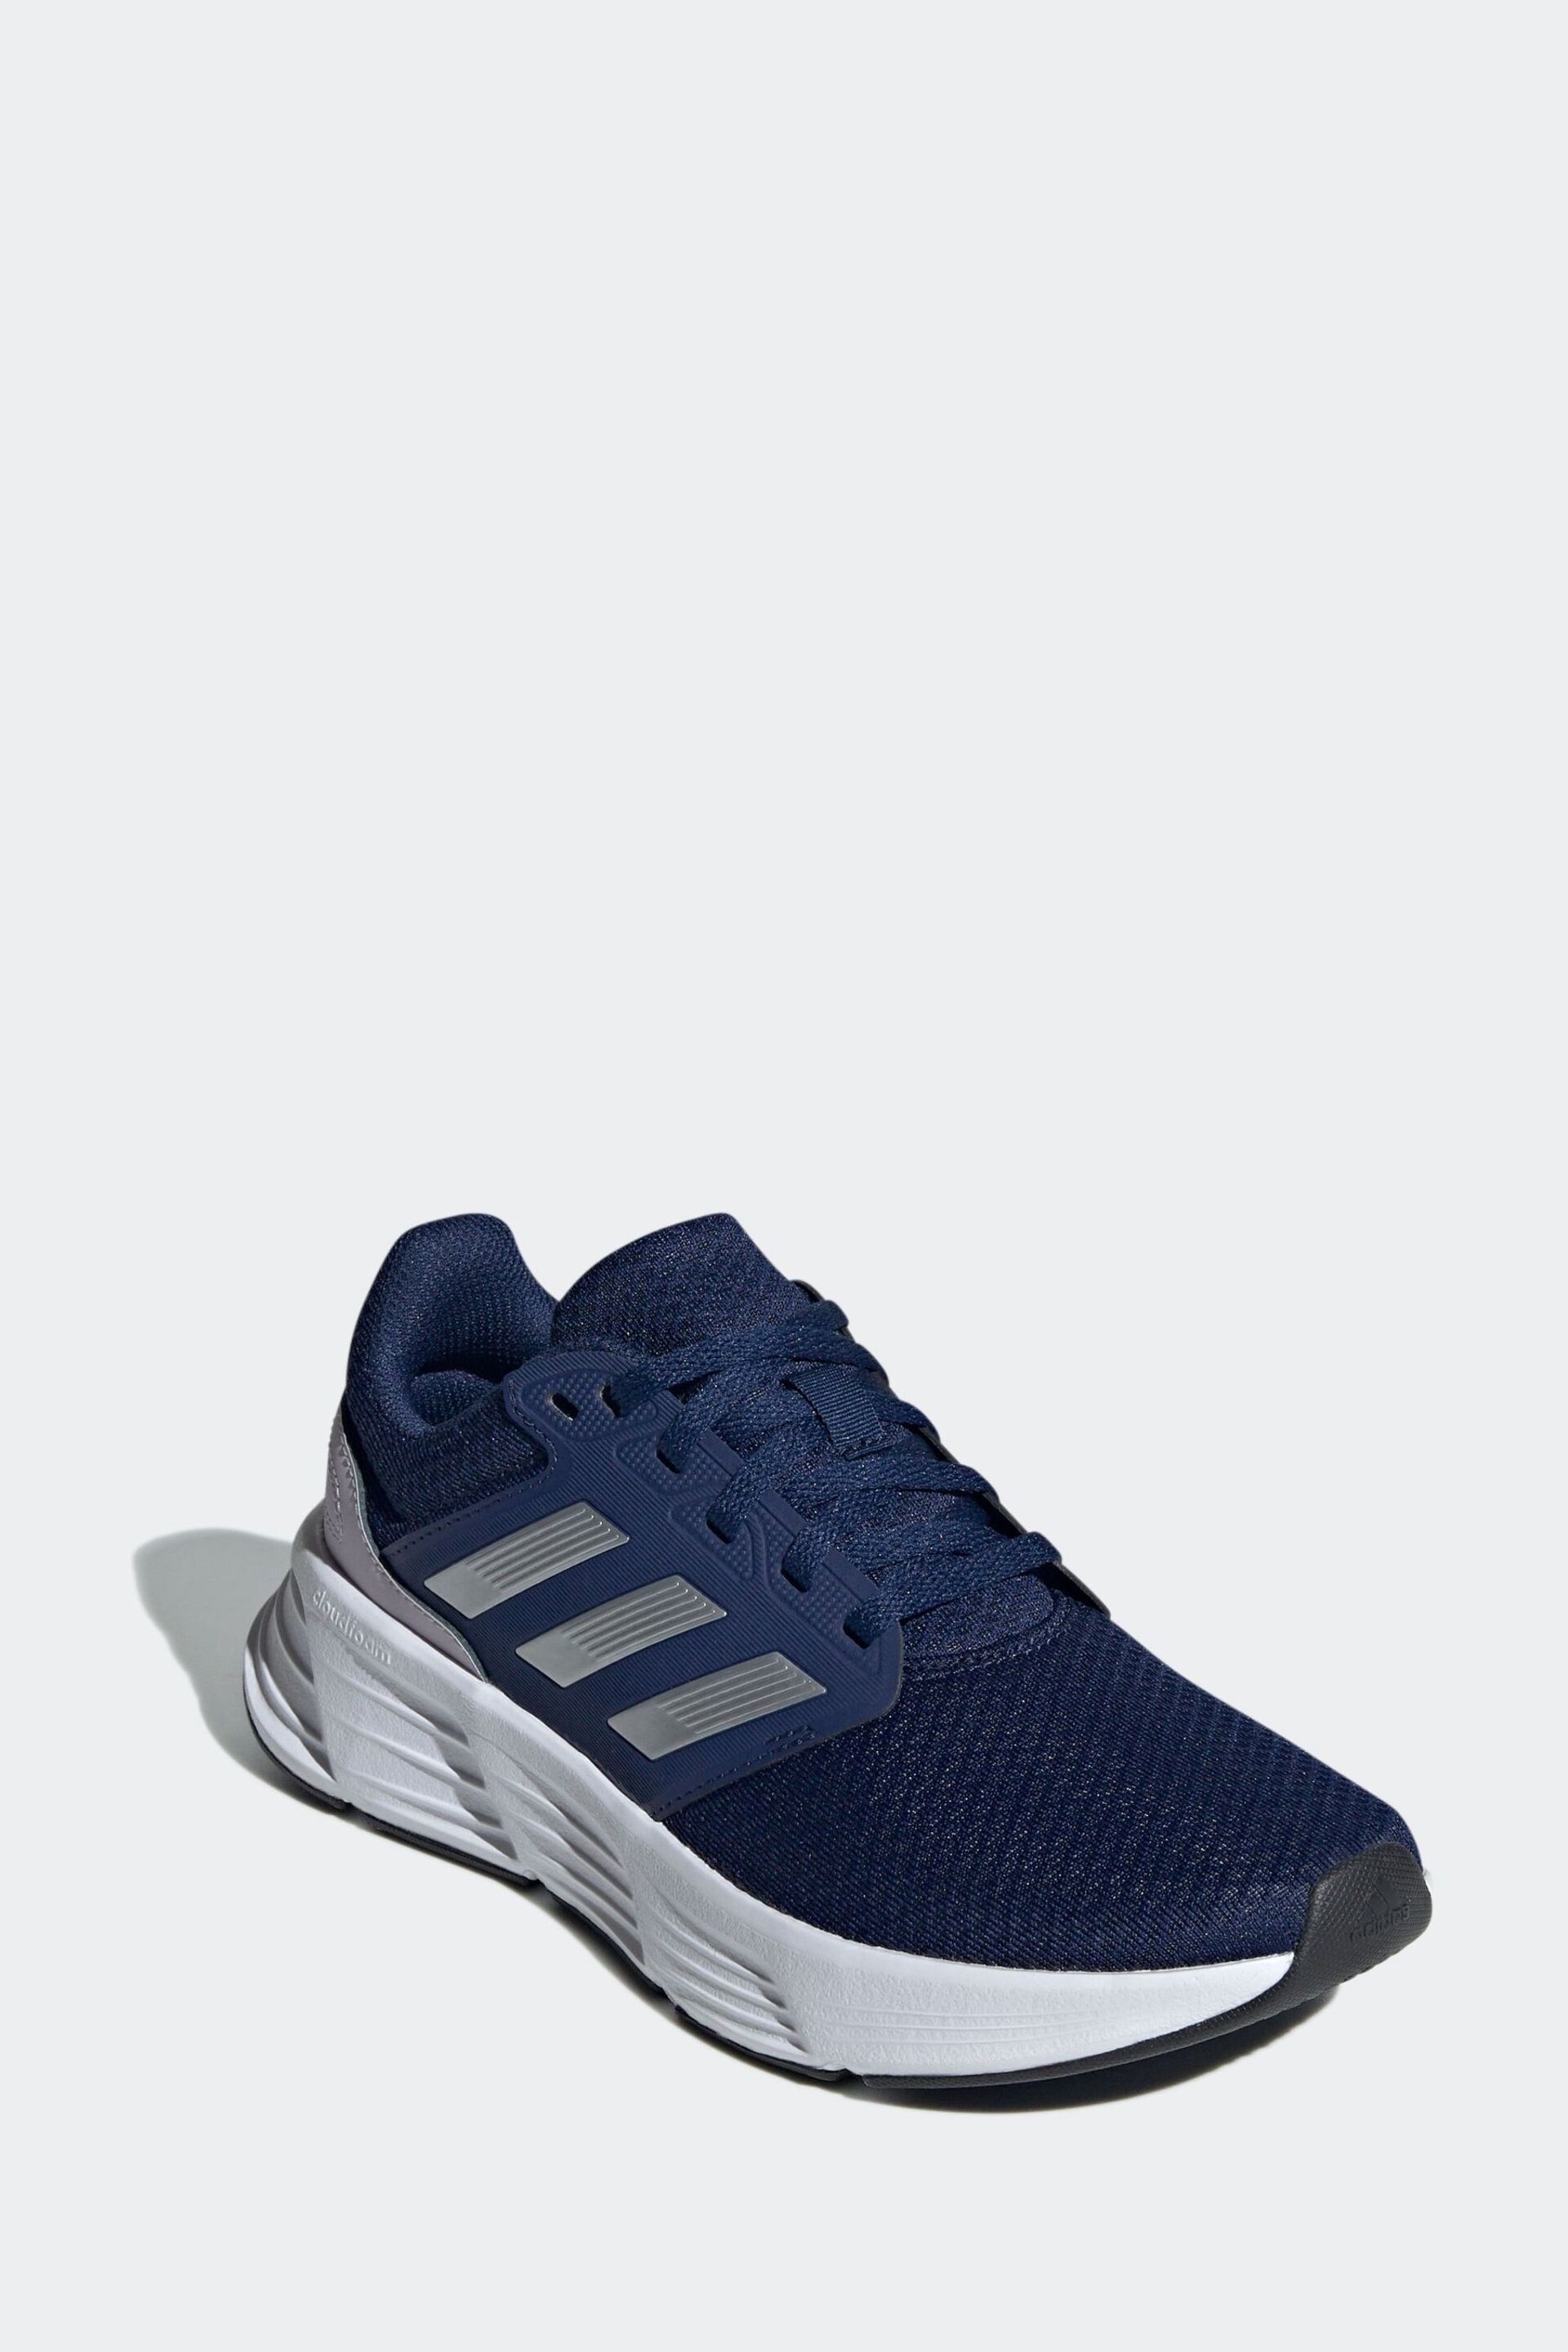 adidas Blue Galaxy 6 Trainers - Image 4 of 8